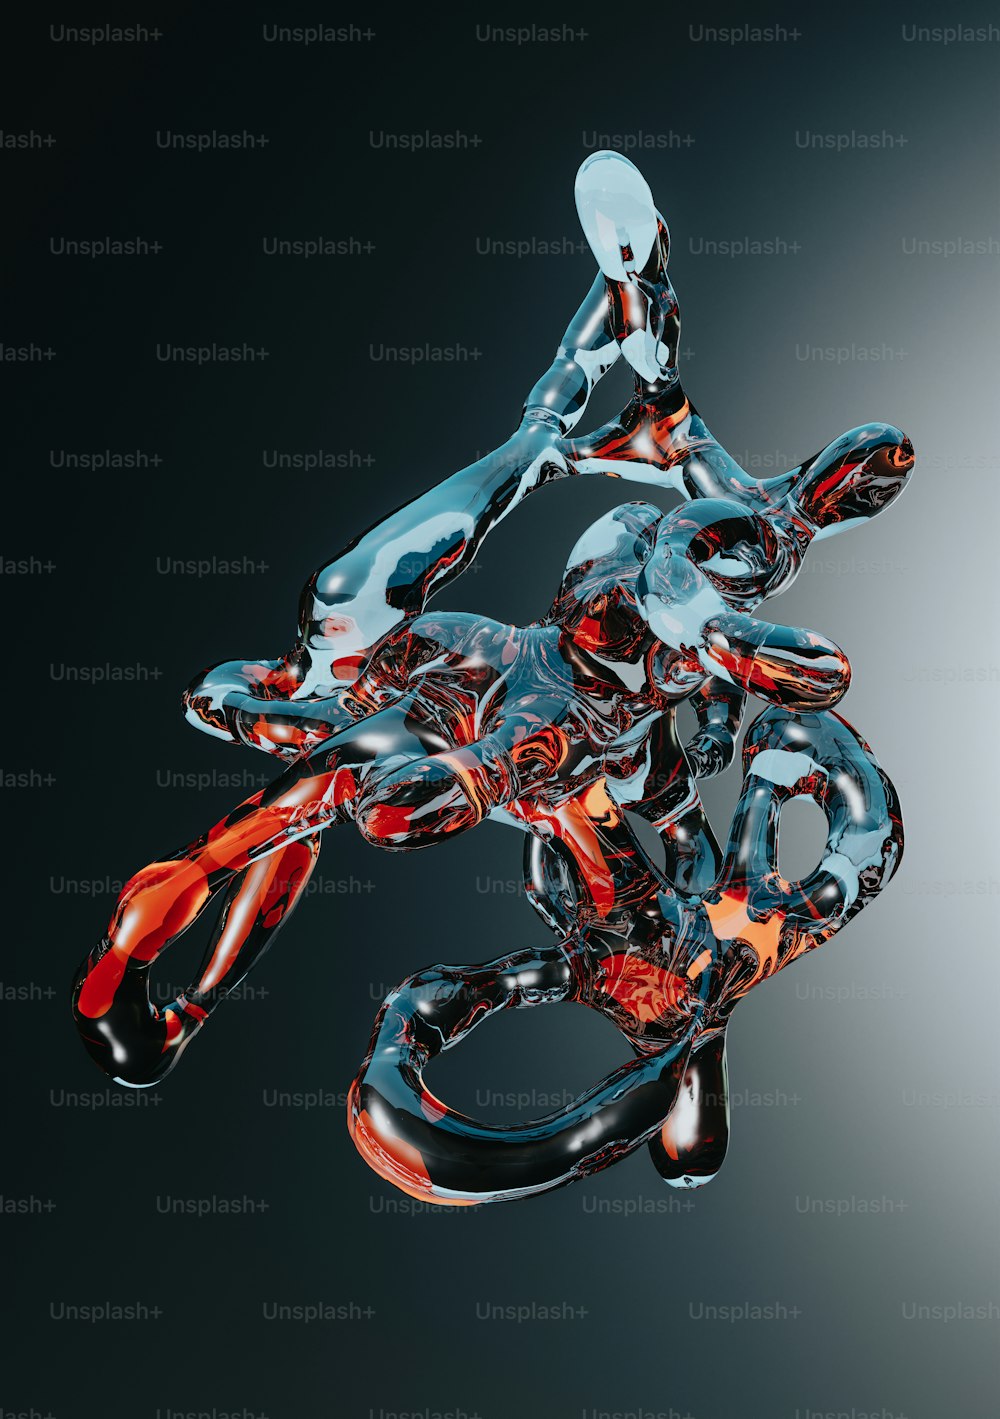 a 3d image of a person riding a motorcycle